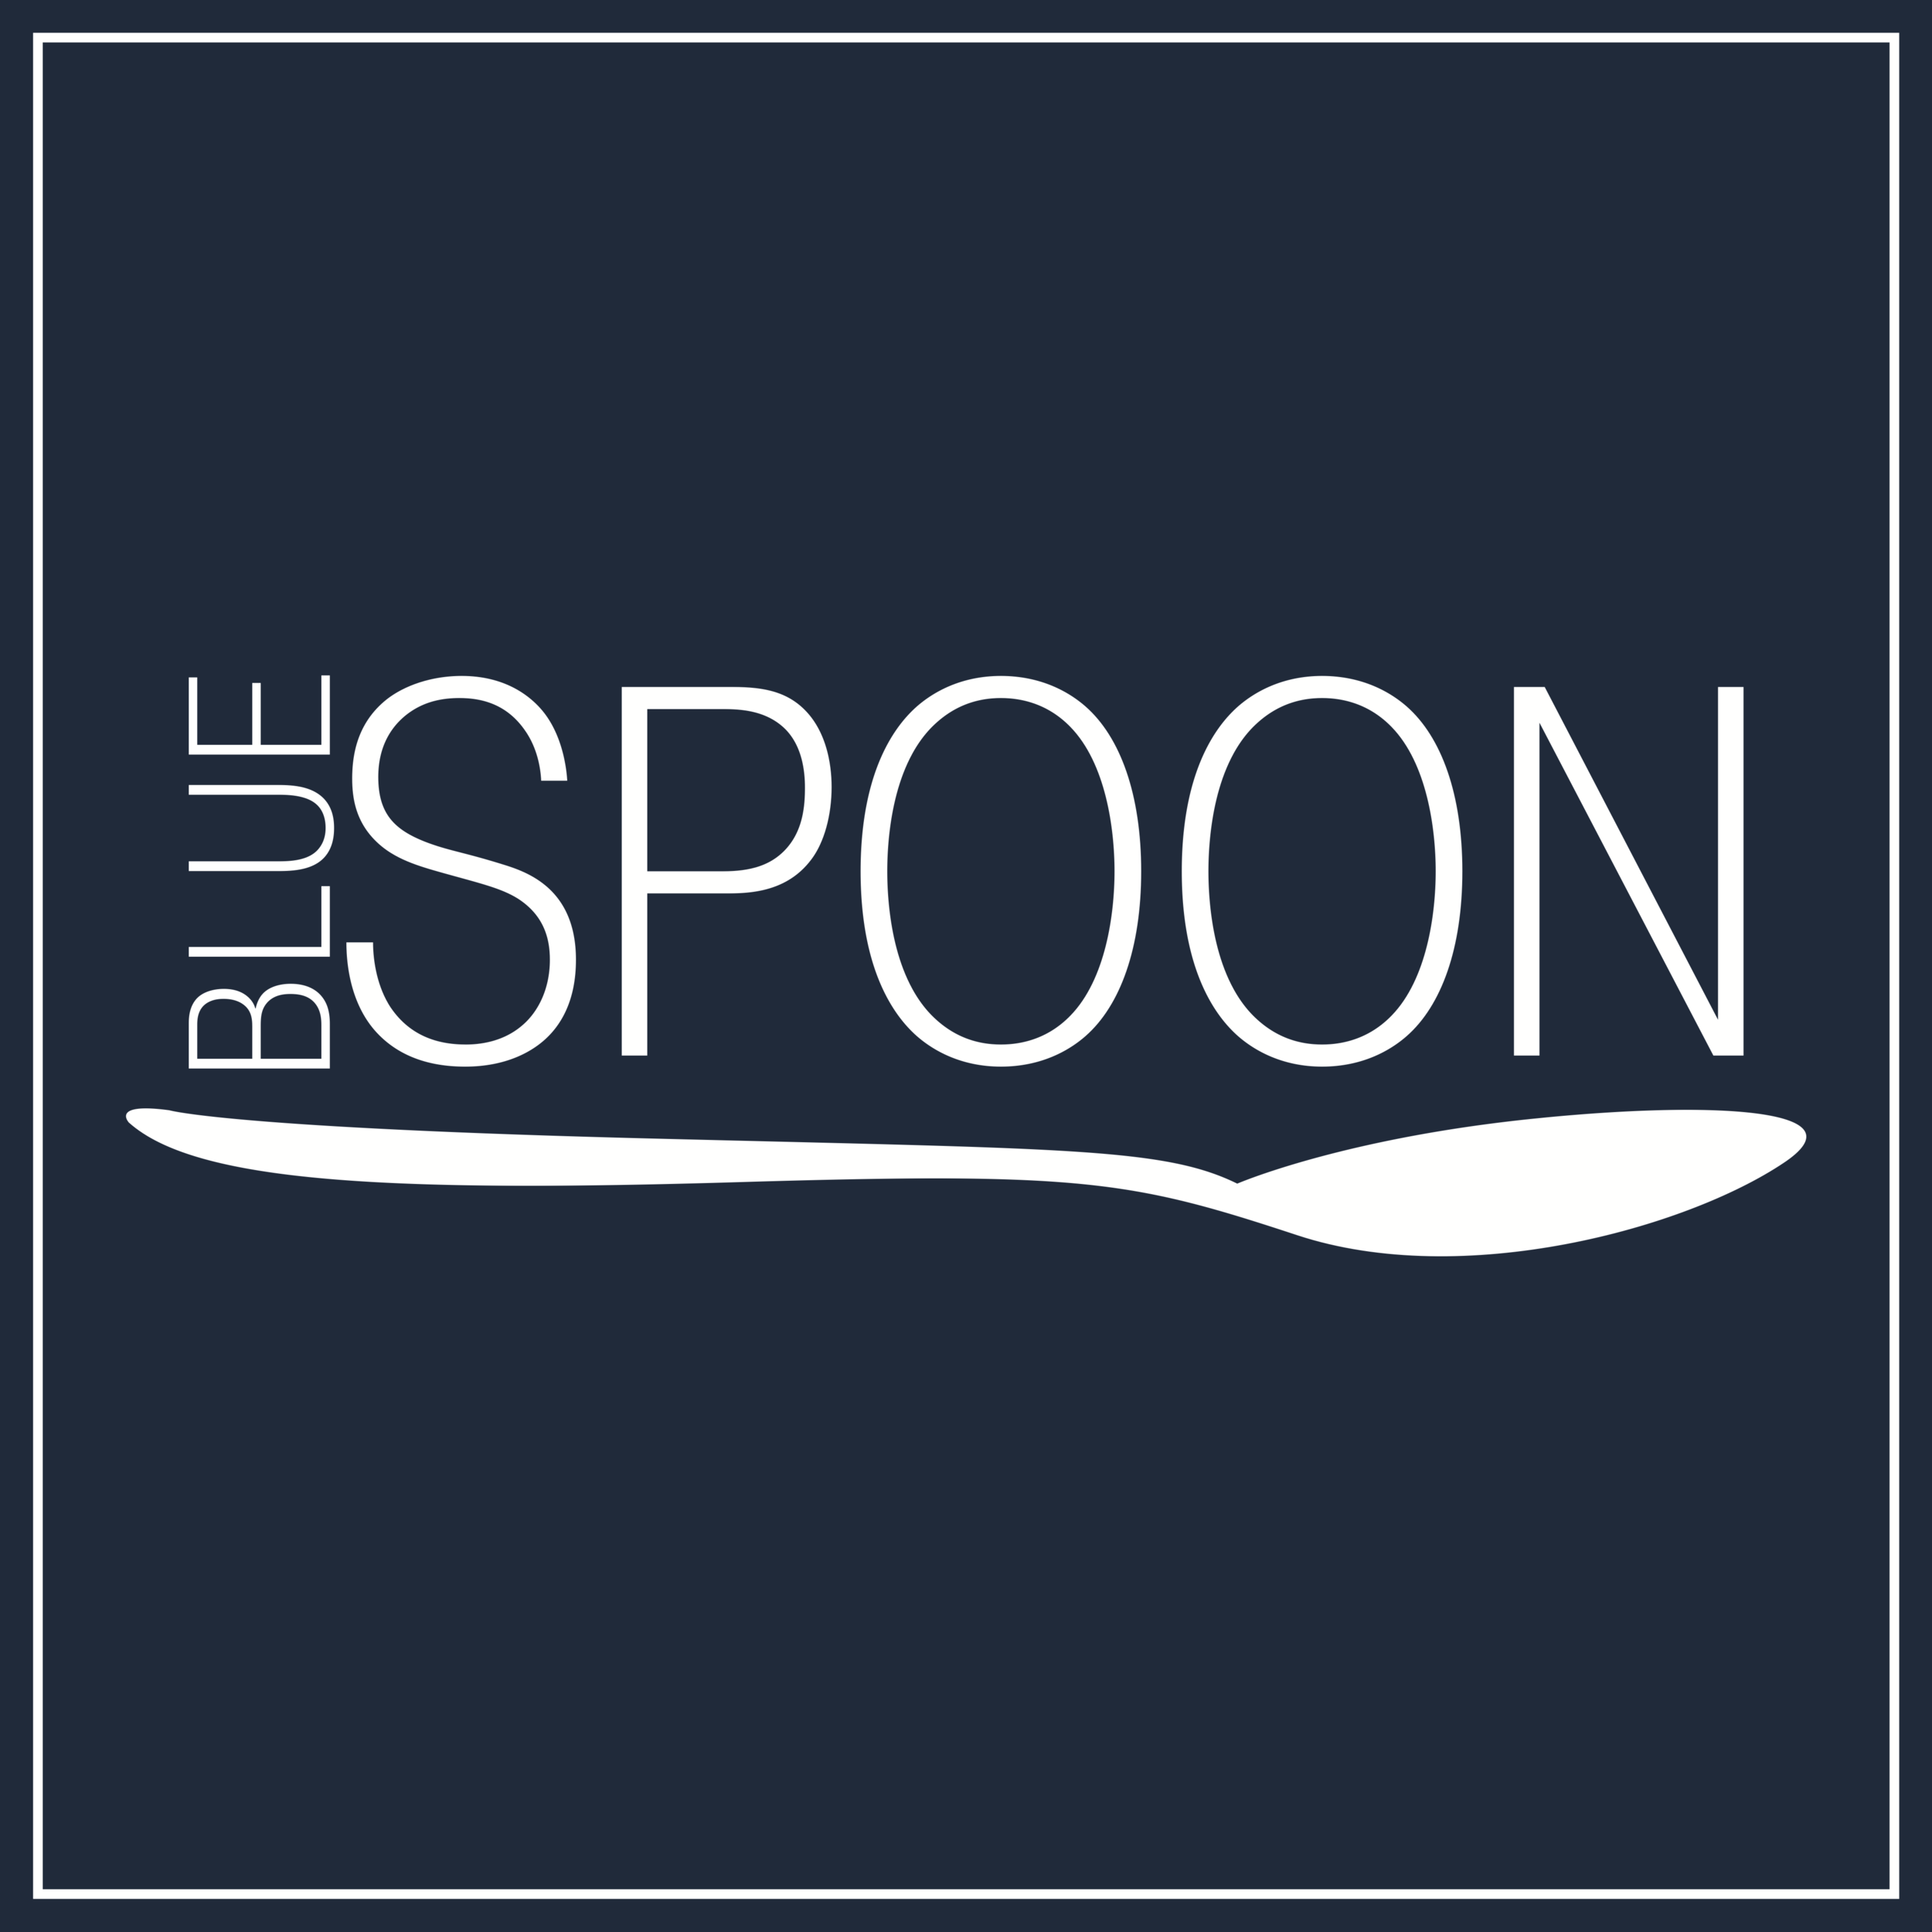 The Blue Spoon